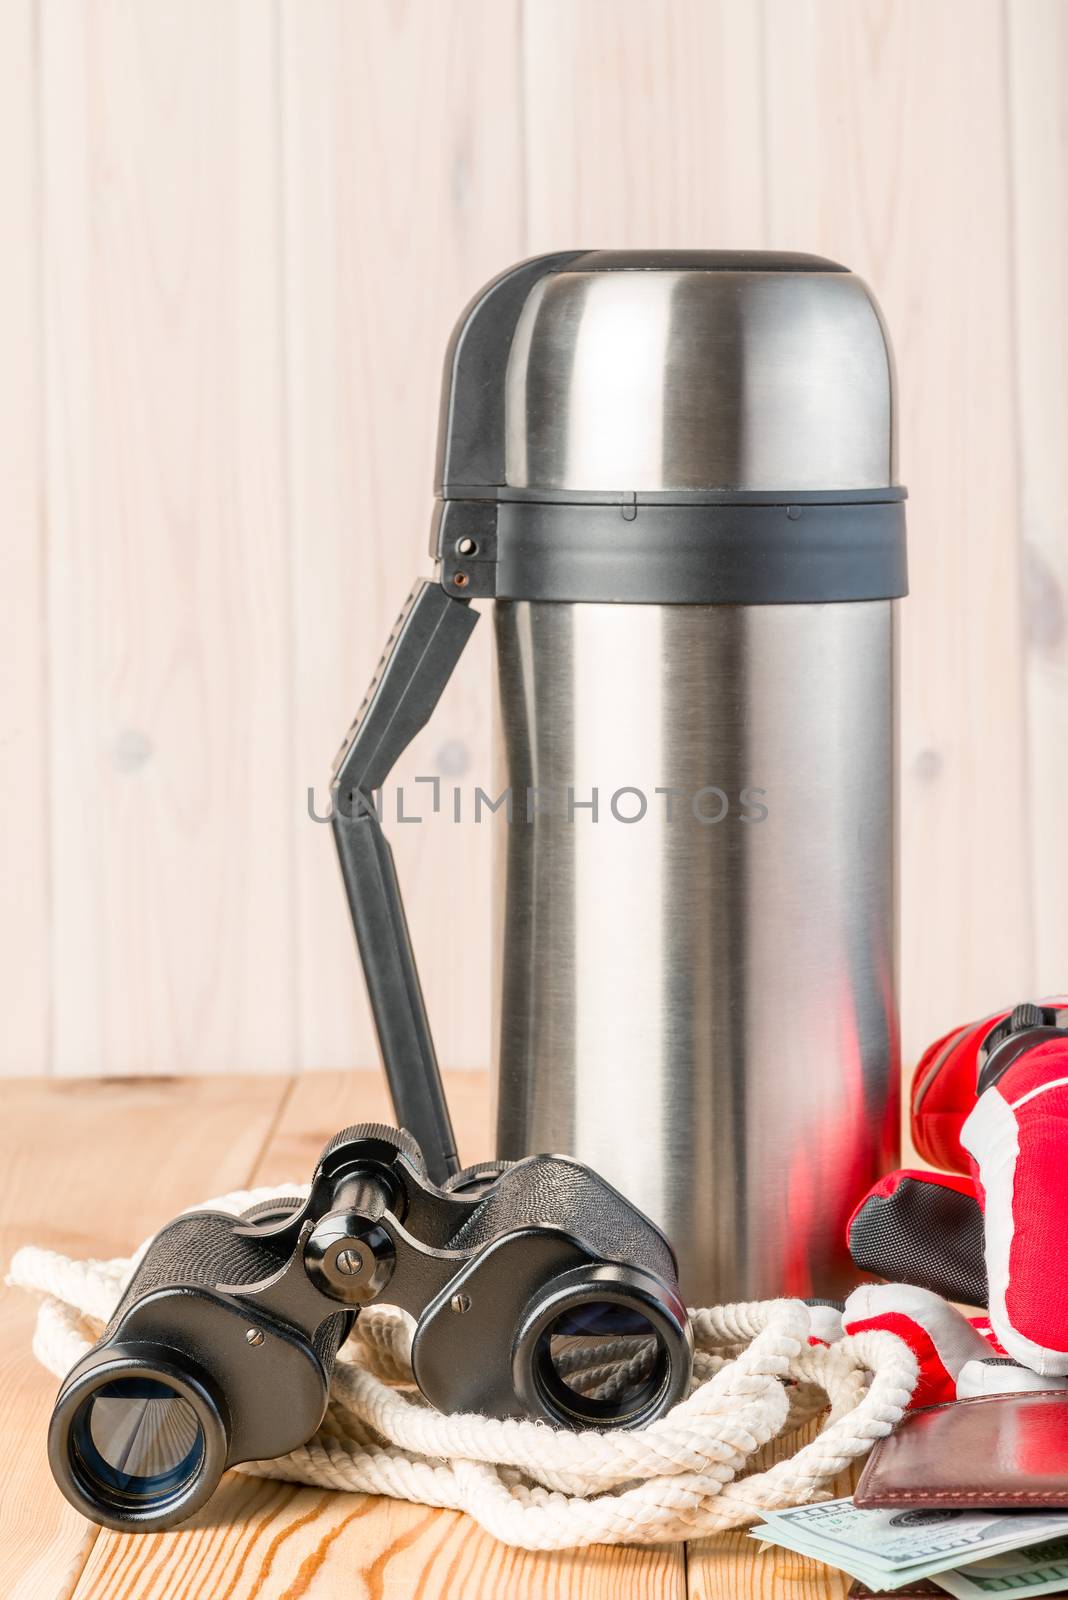 thermos with hot tea, binoculars, rope and gloves for a dangerous winter hike on a wooden background